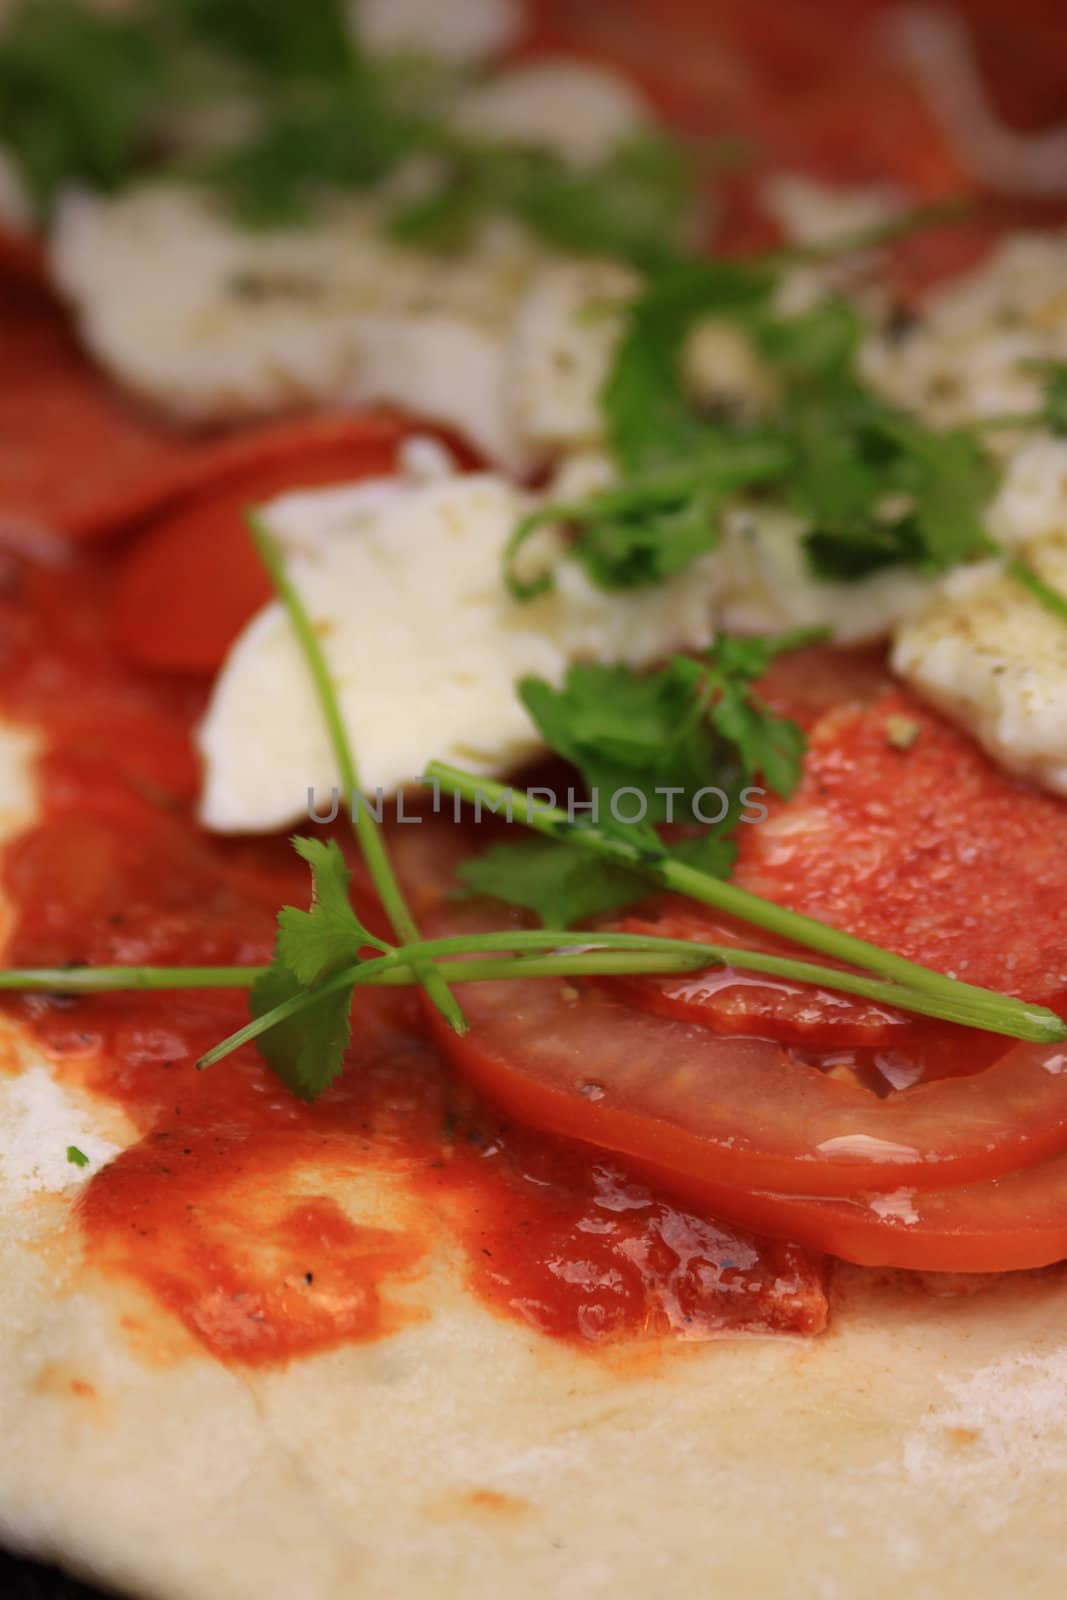 A low angled image and close up of a homemade pizza. Tomato's, pepperoni sausage and mozzarella cheese with fresh coriander, set on a pizza dough base with a homemade tomato sauce. Set on a portrait format with copy space available.